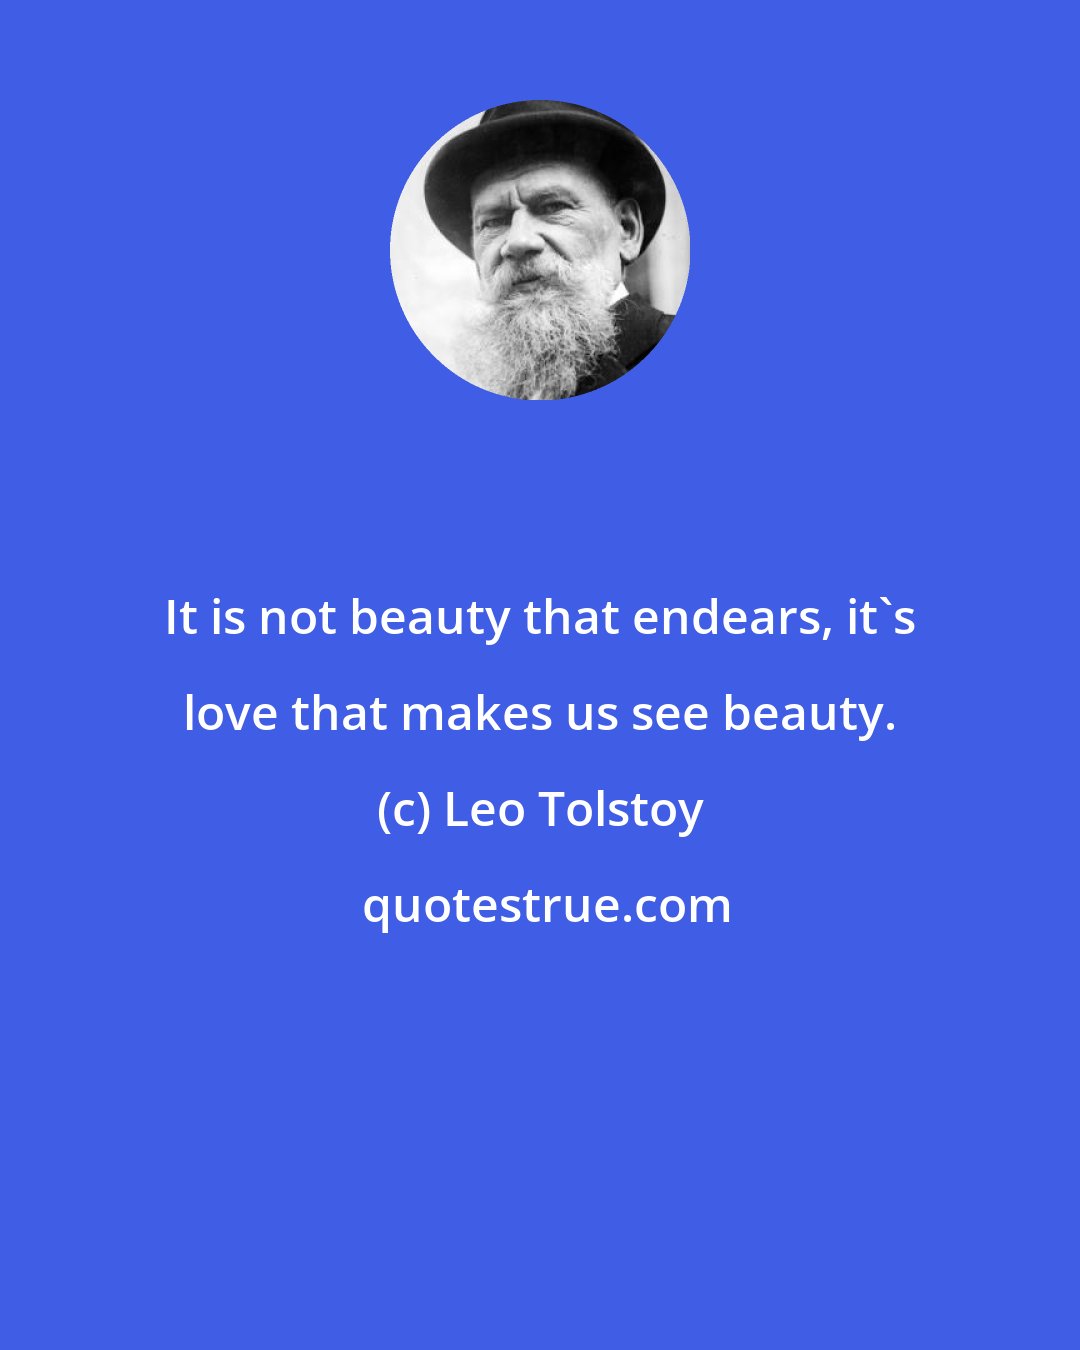 Leo Tolstoy: It is not beauty that endears, it's love that makes us see beauty.